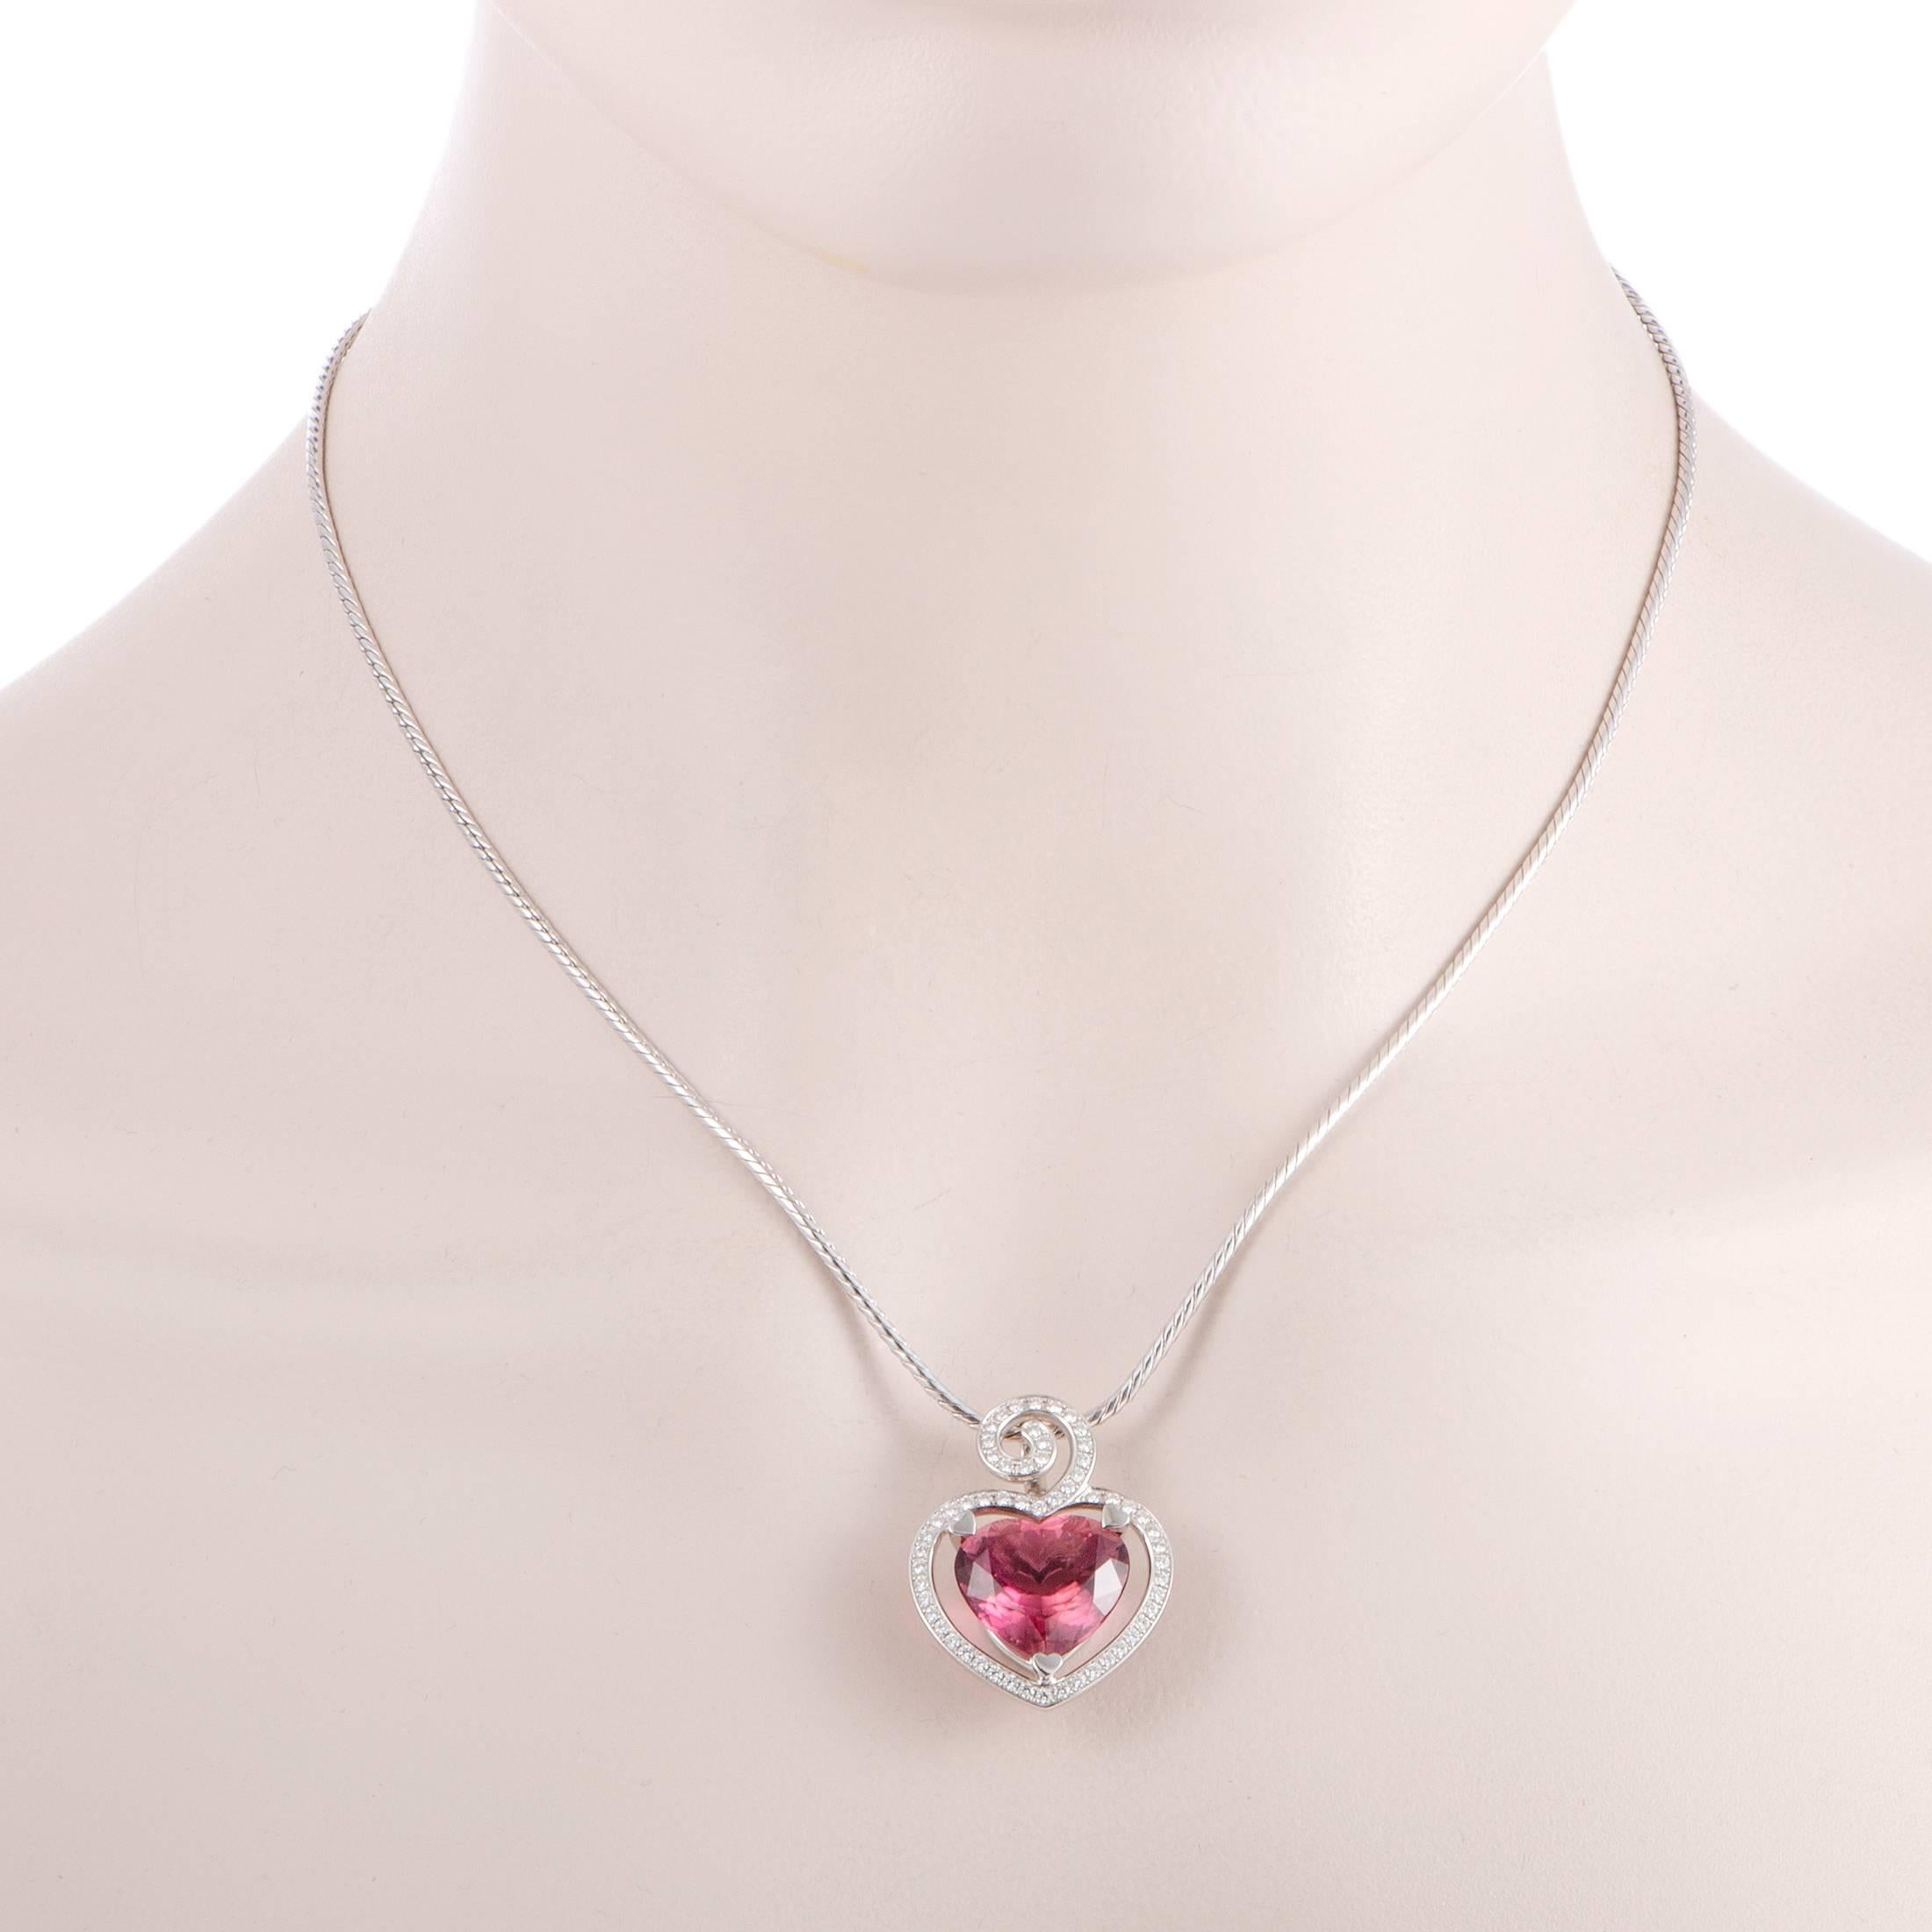 Exquisitely cut, gorgeously strong in color and boasting the romantic shape of a heart, the astounding pink tourmaline weighing approximately 9.00 carats is placed at the heart of this fascinating necklace from Breguet which also features shimmering